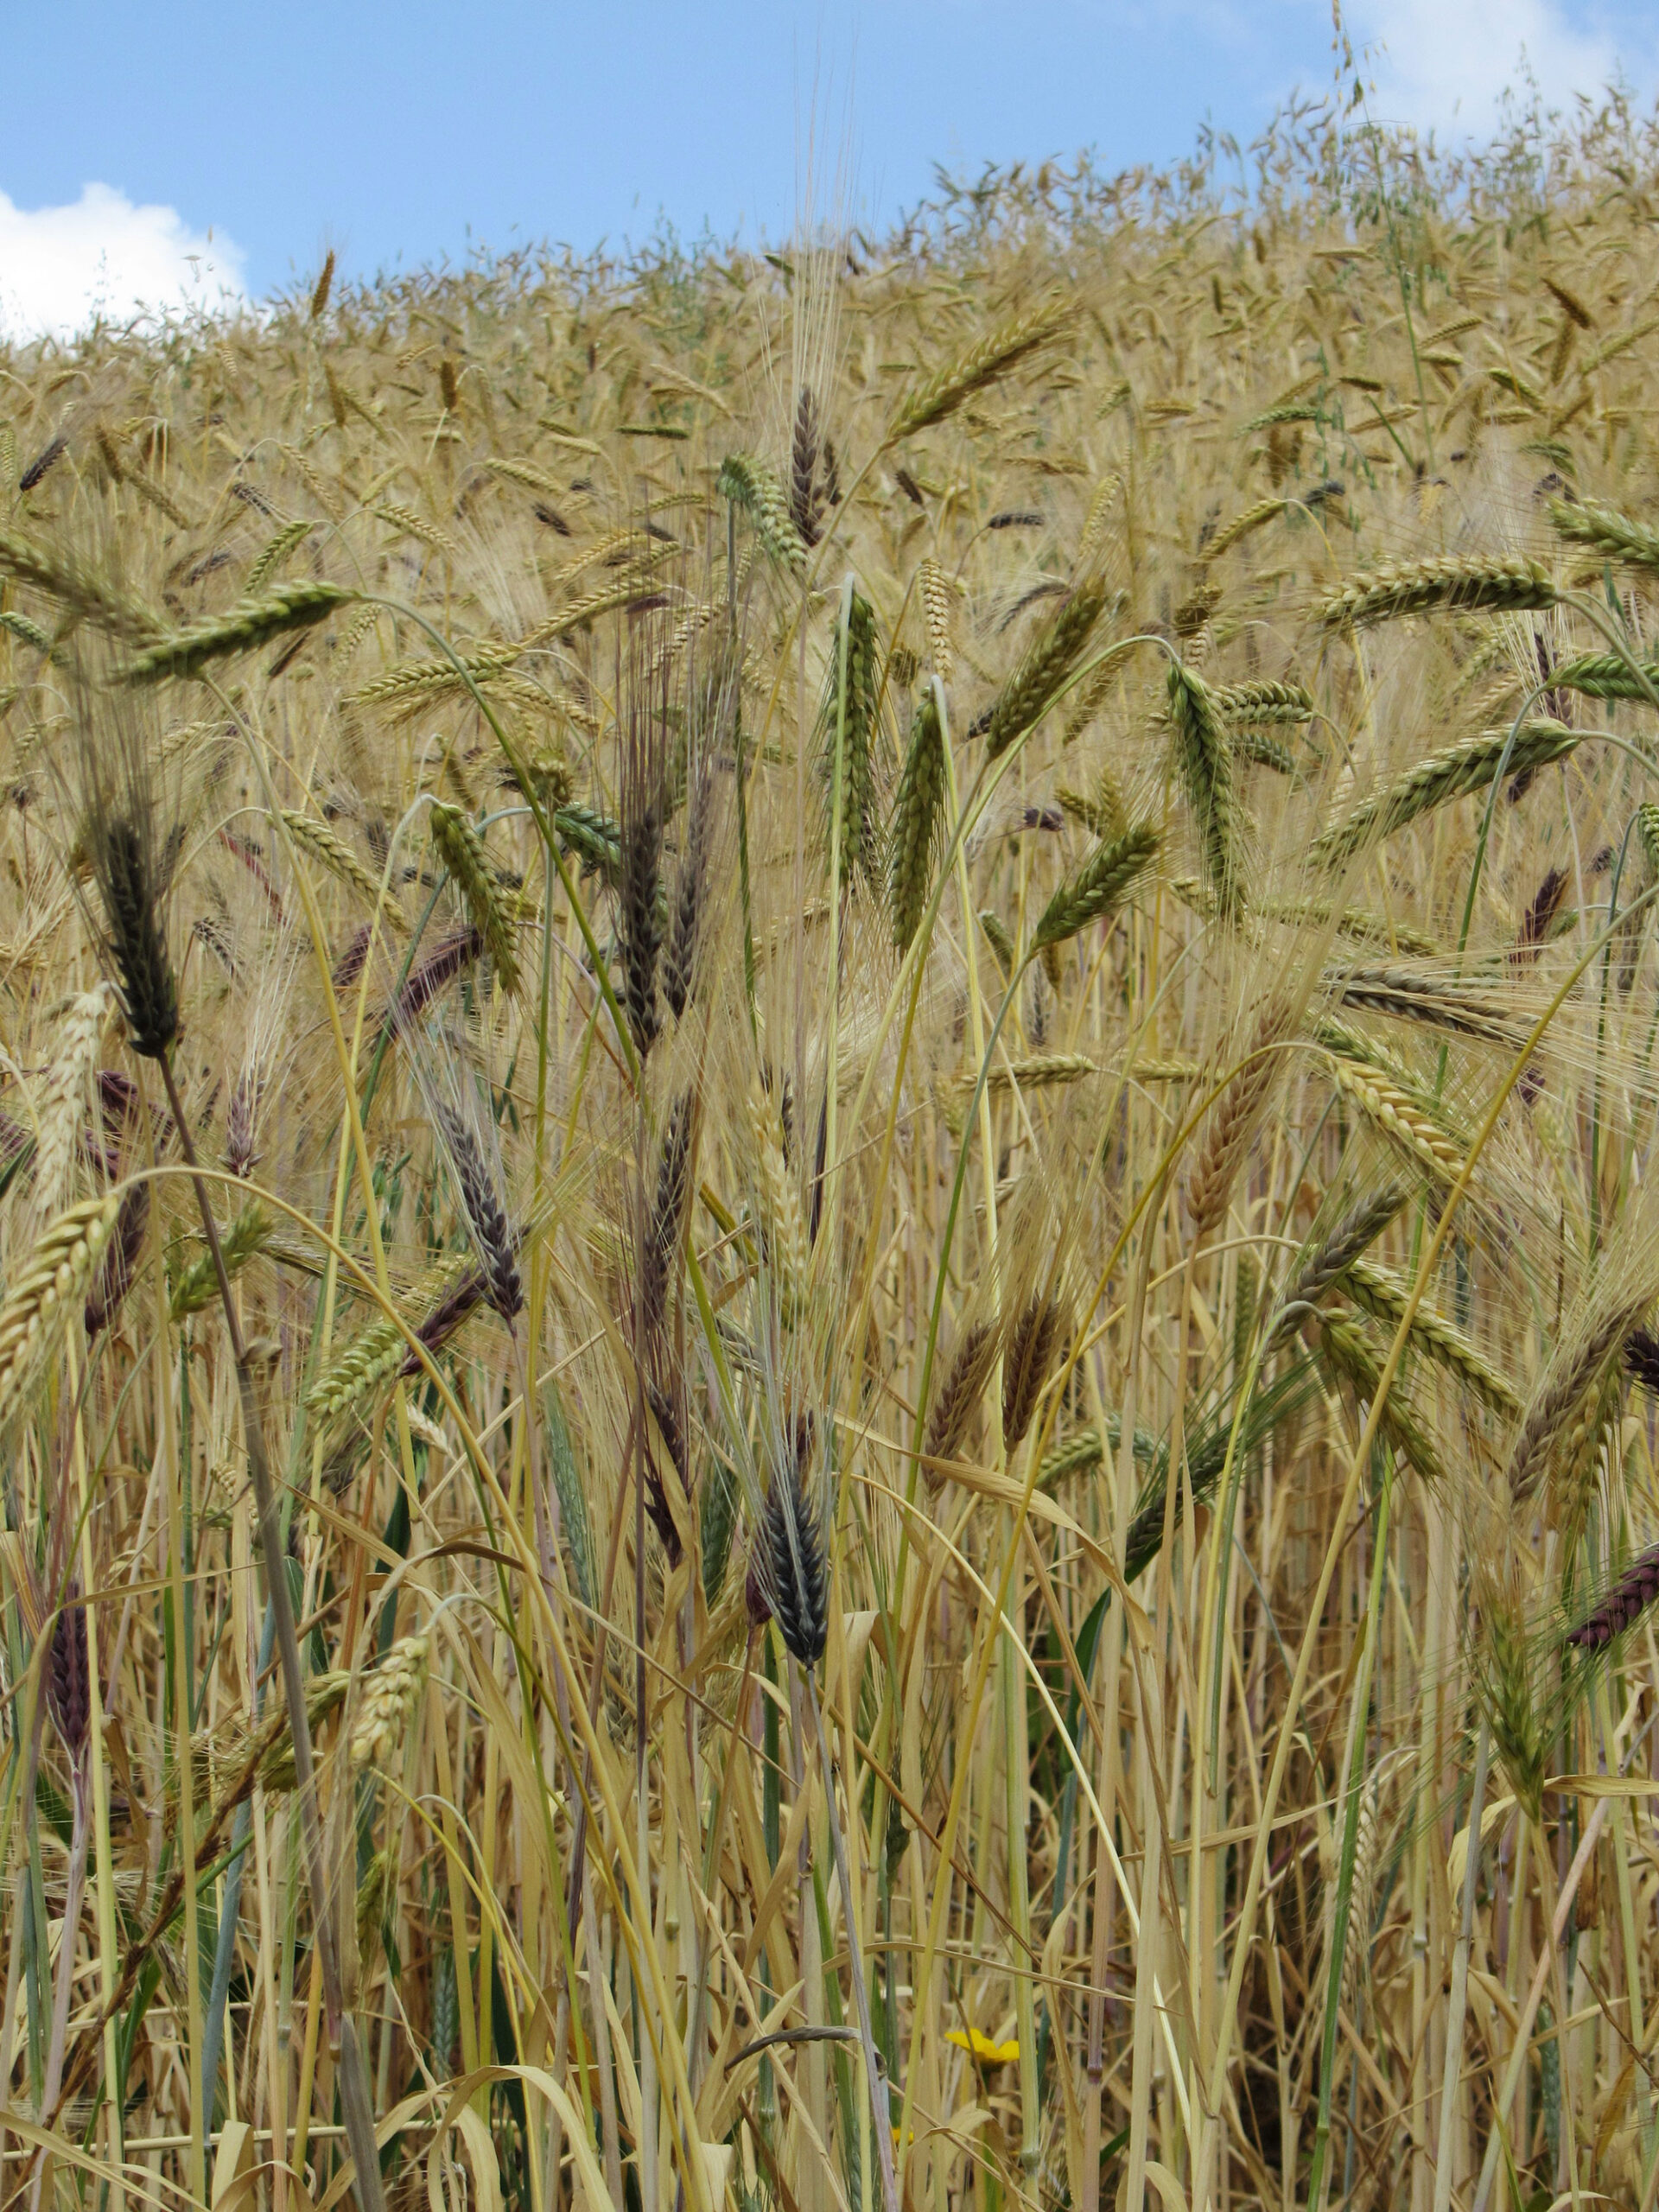 Grains growing in a field in the Wollo region of Ethiopia